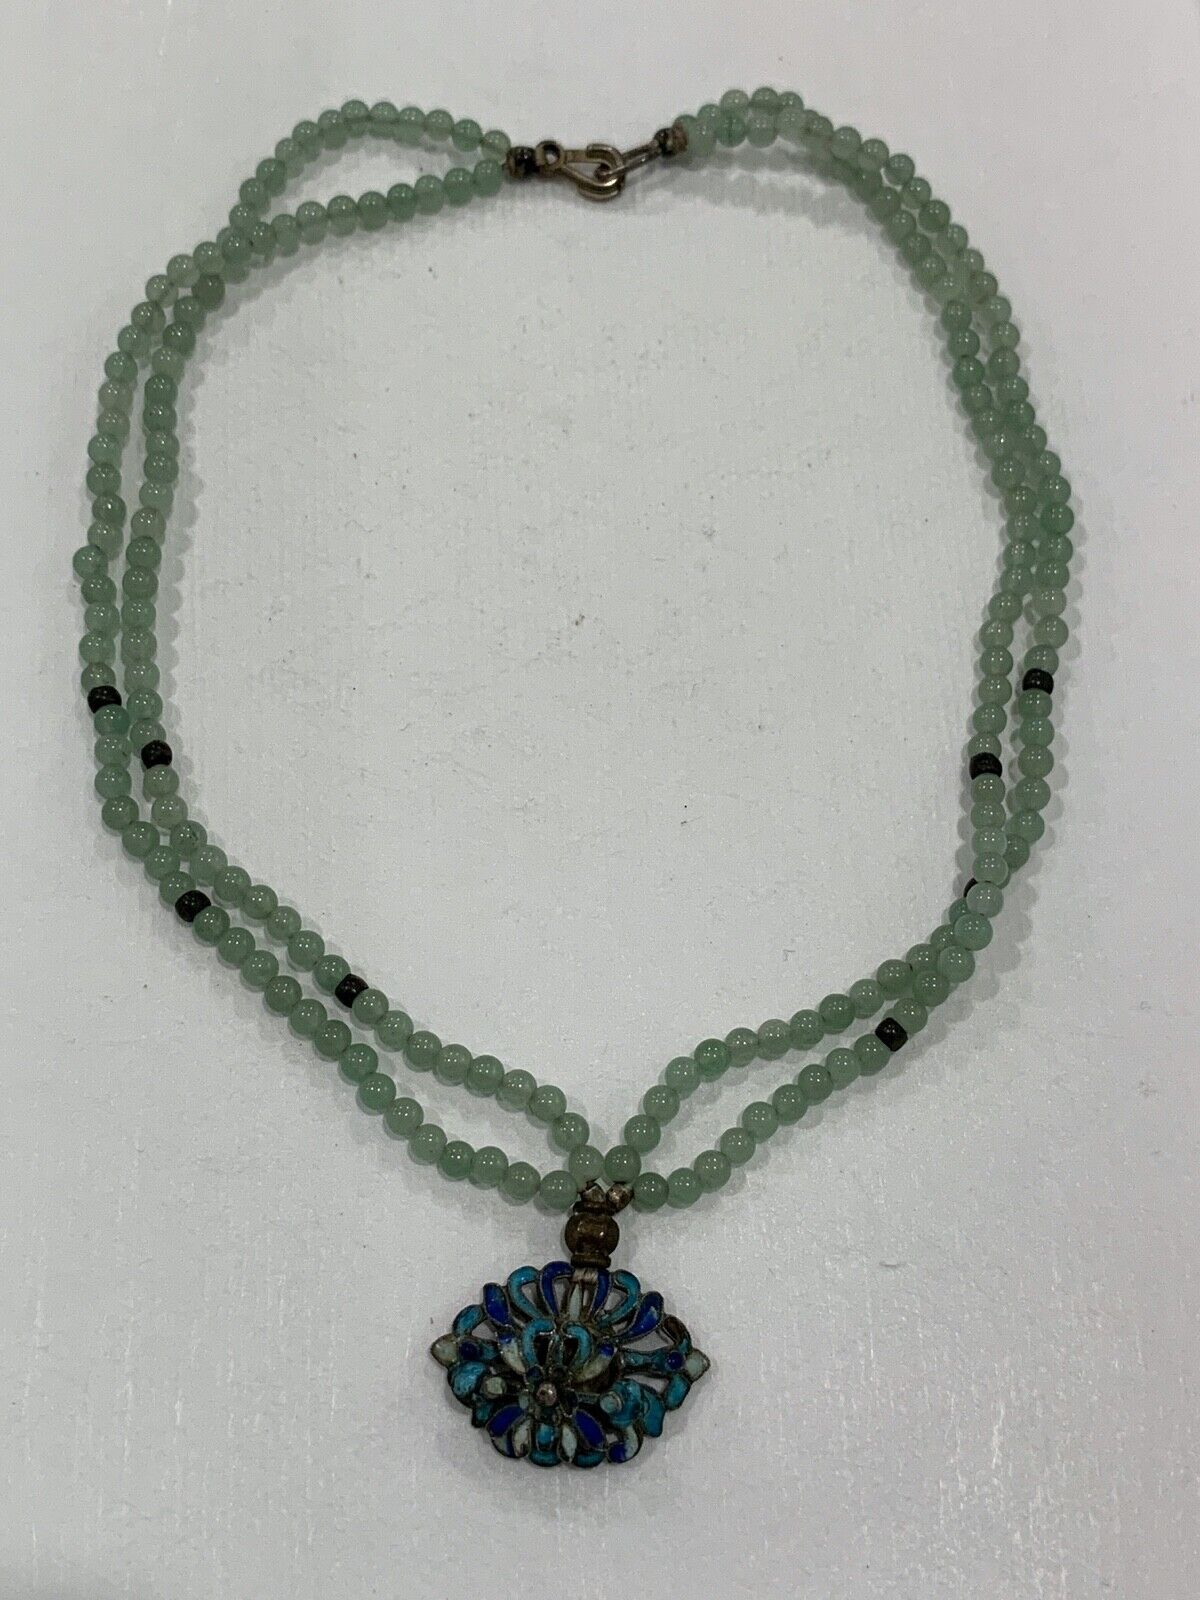 Vintage Chinese Green Jade or Mineral Double Strand Bead Necklace Enamel Pendant